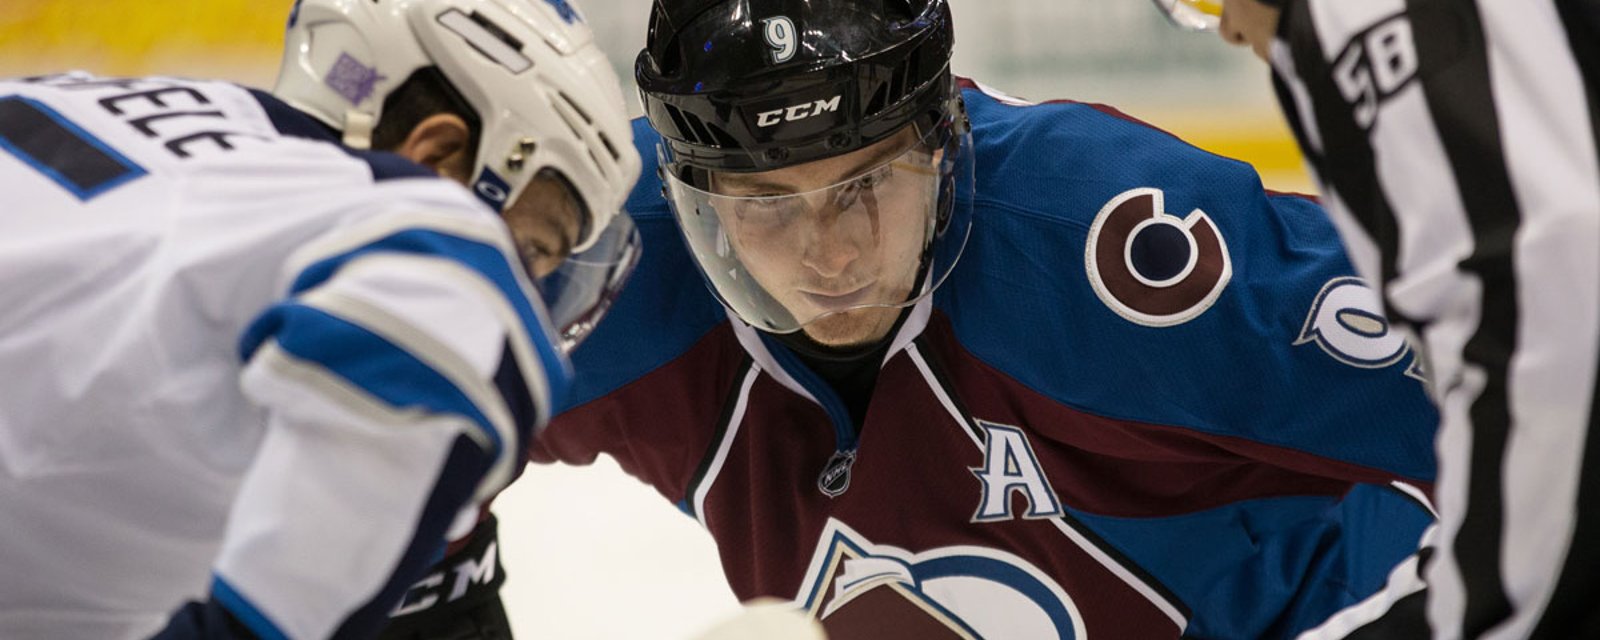 Breaking: We know exactly what the Avalanche wanted for Duchene!